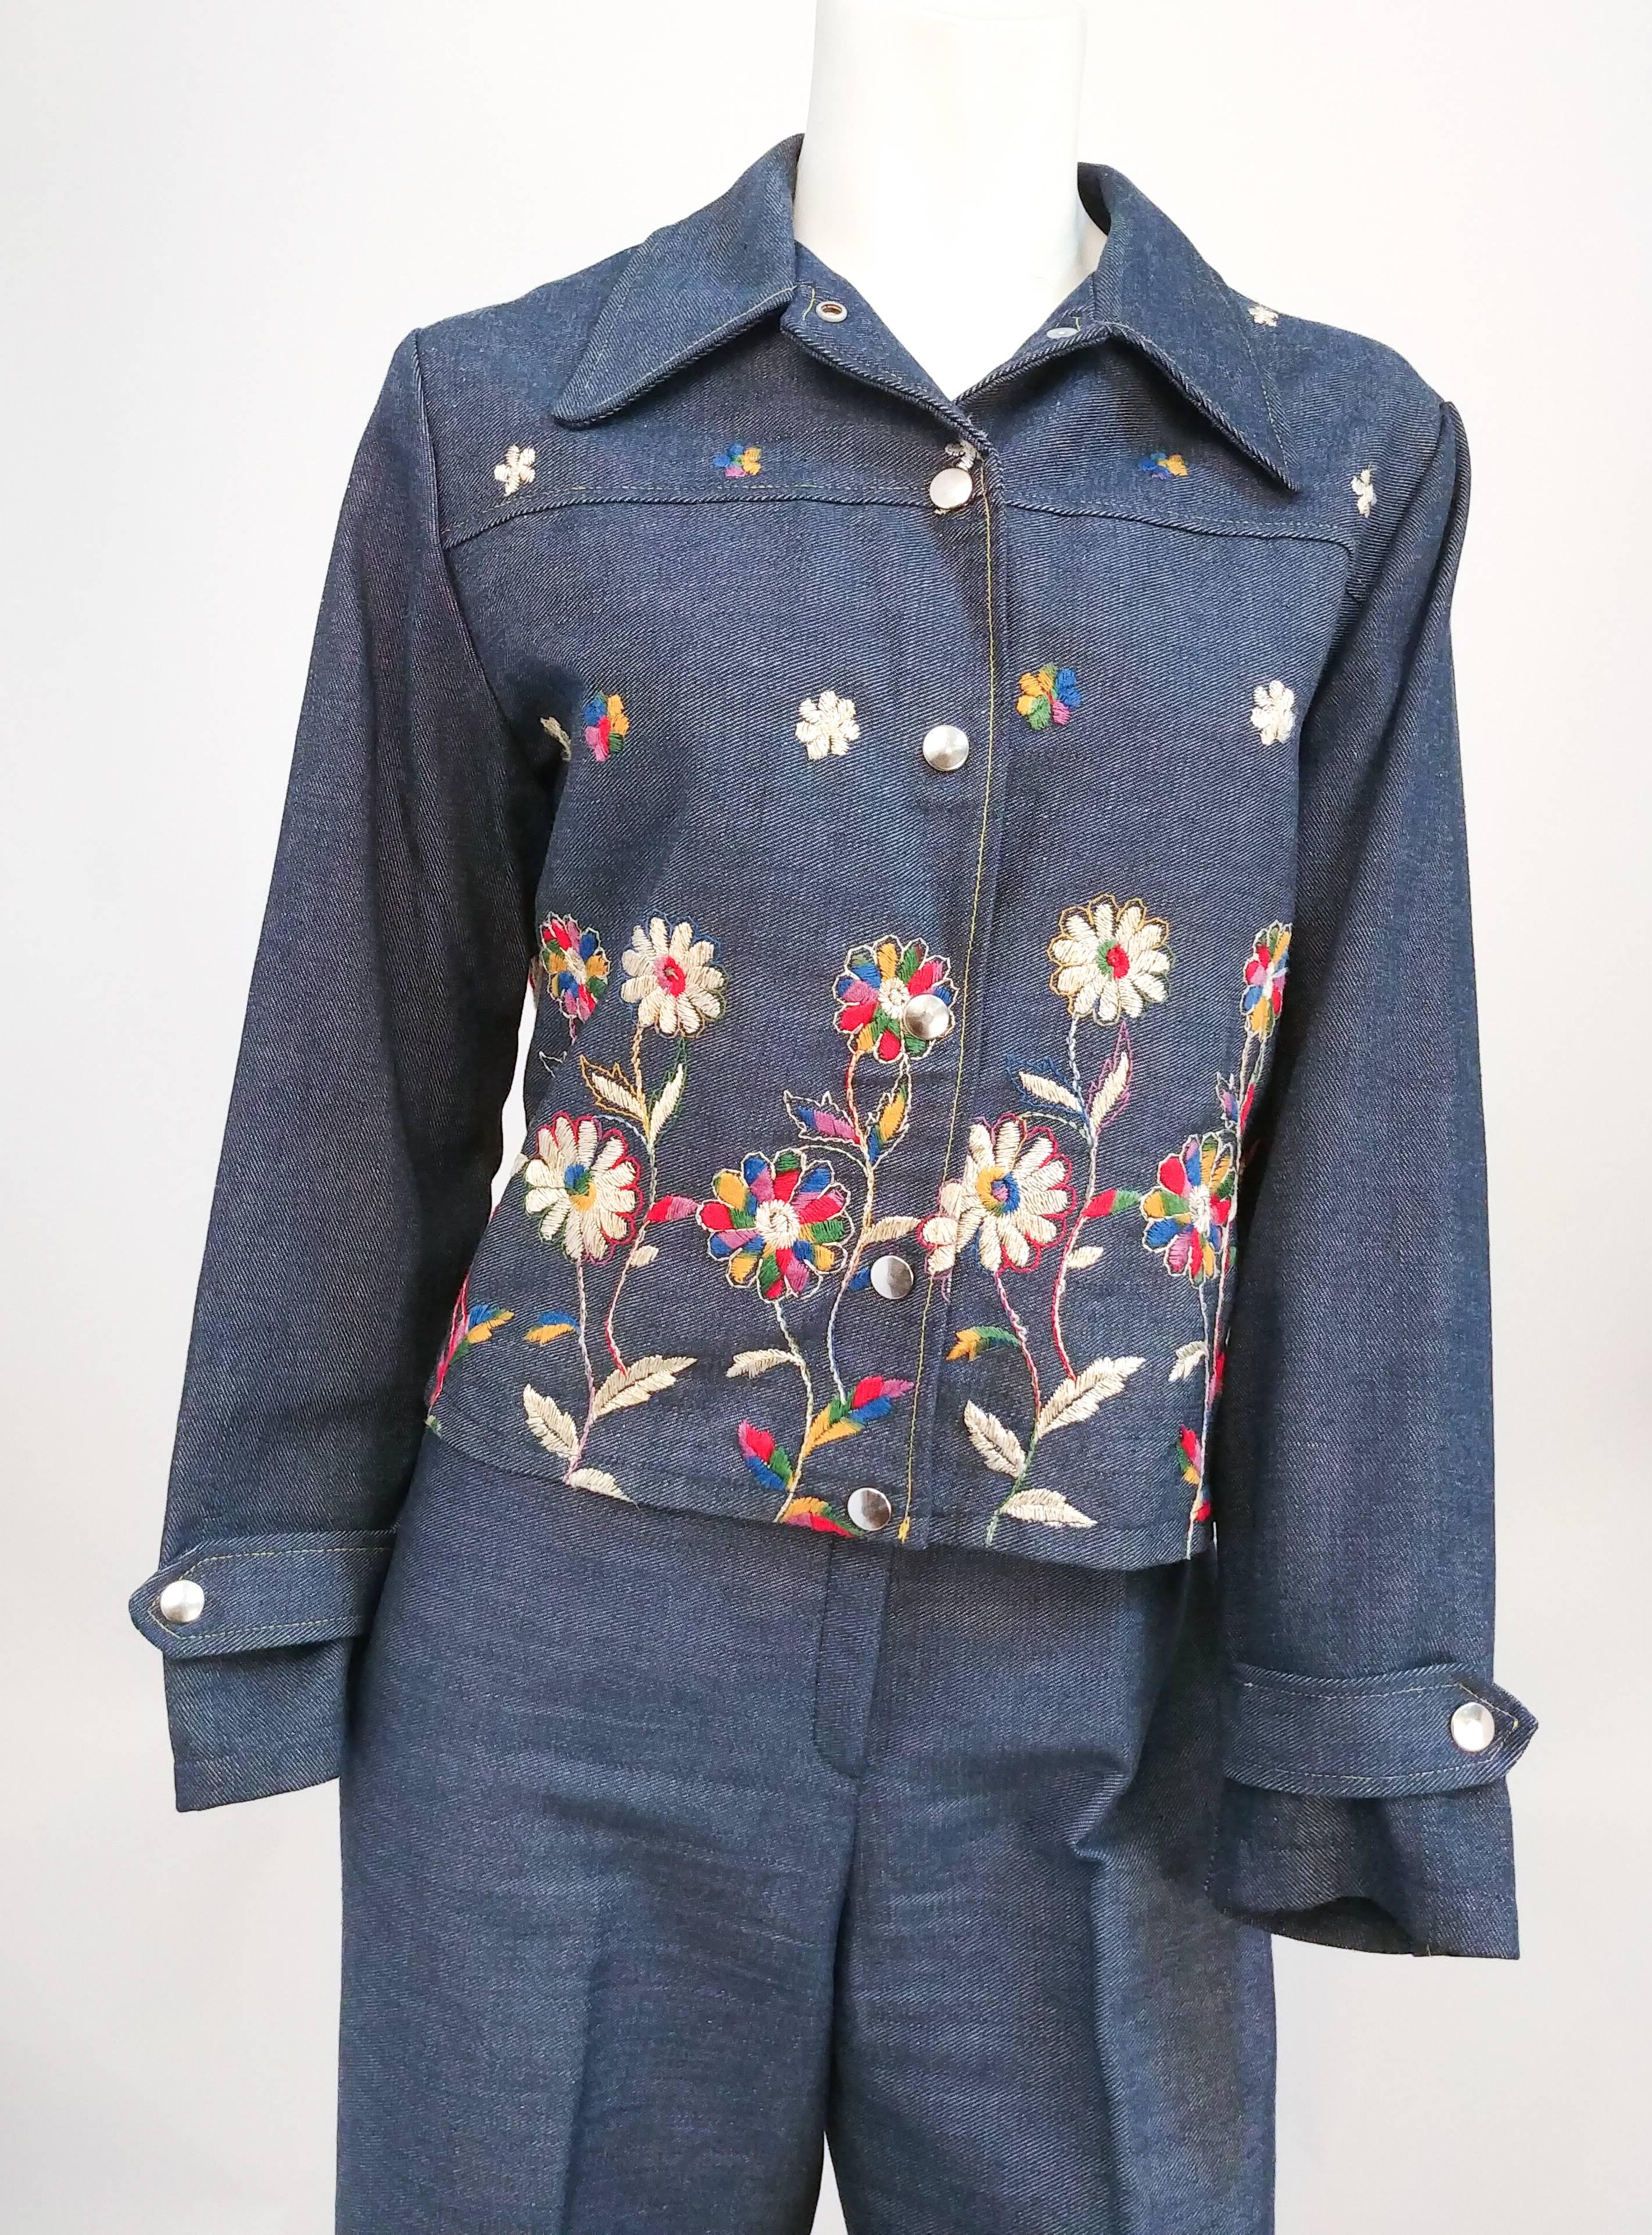 1970s Embroidered Demin Two Piece Set. Two piece denim set with embroidered flower border. Snap front buttons on jacket and pant. 